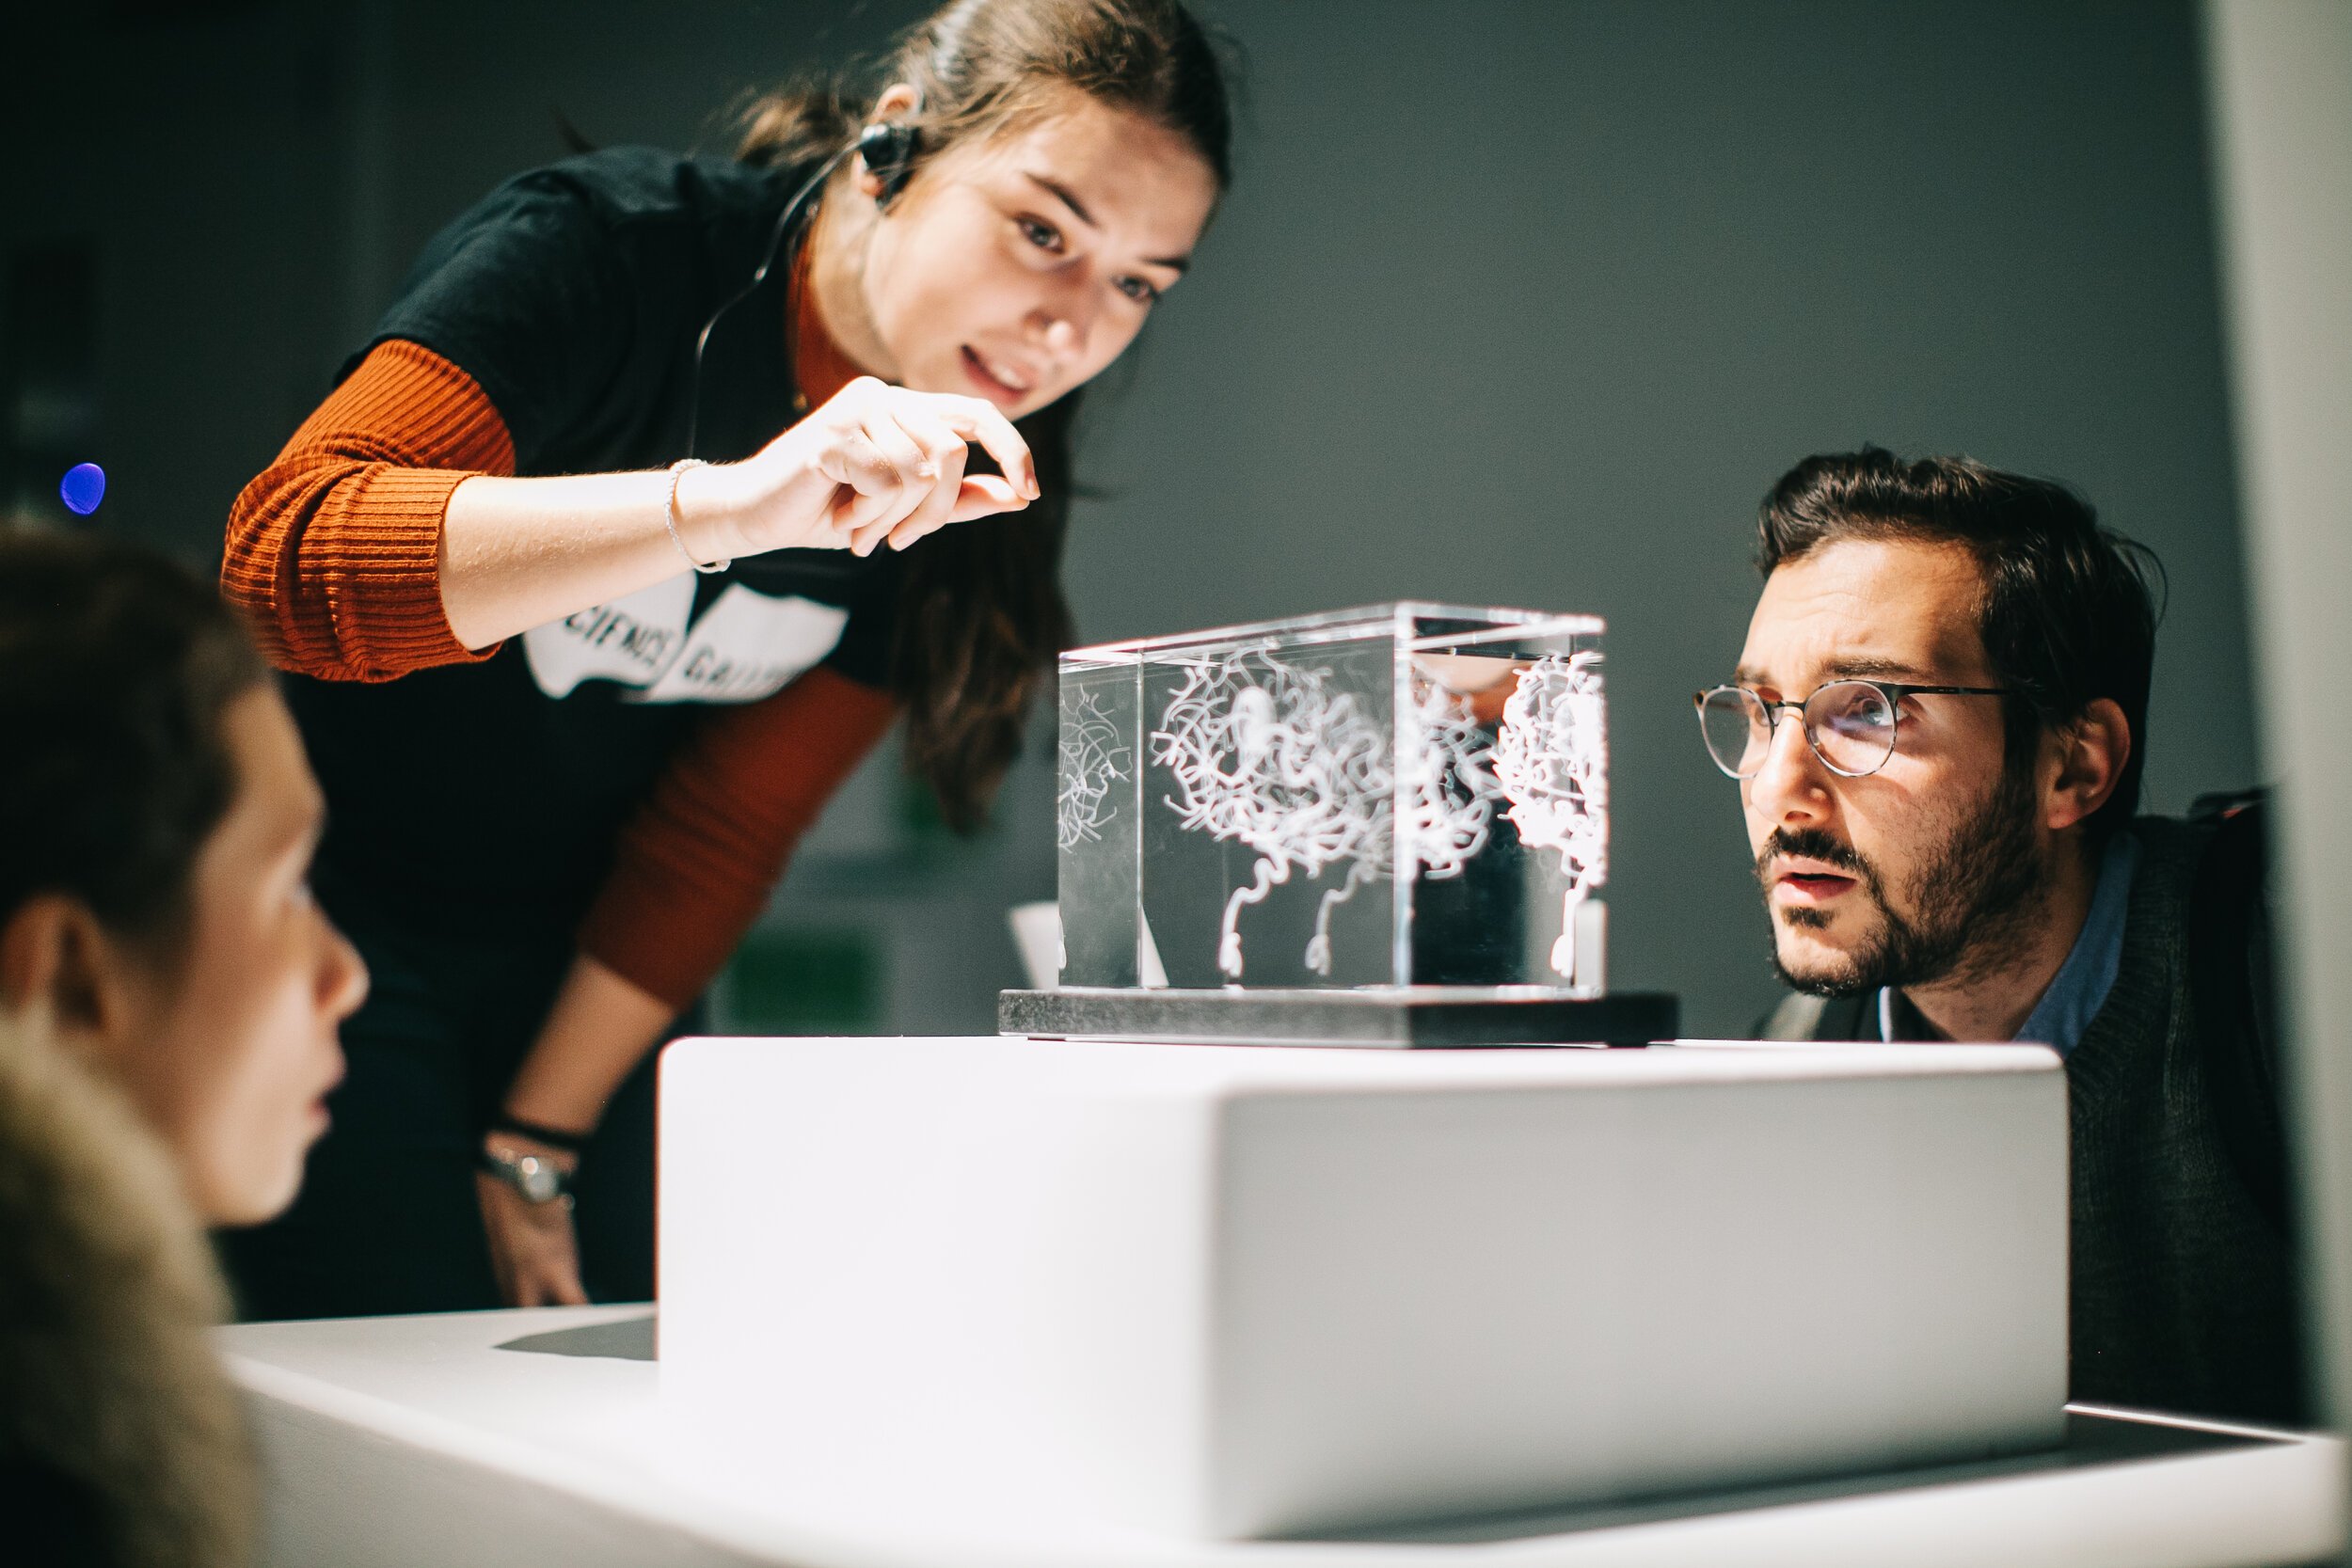 Science Gallery Rotterdam is looking for students and young professionals for Science & Art Summer School